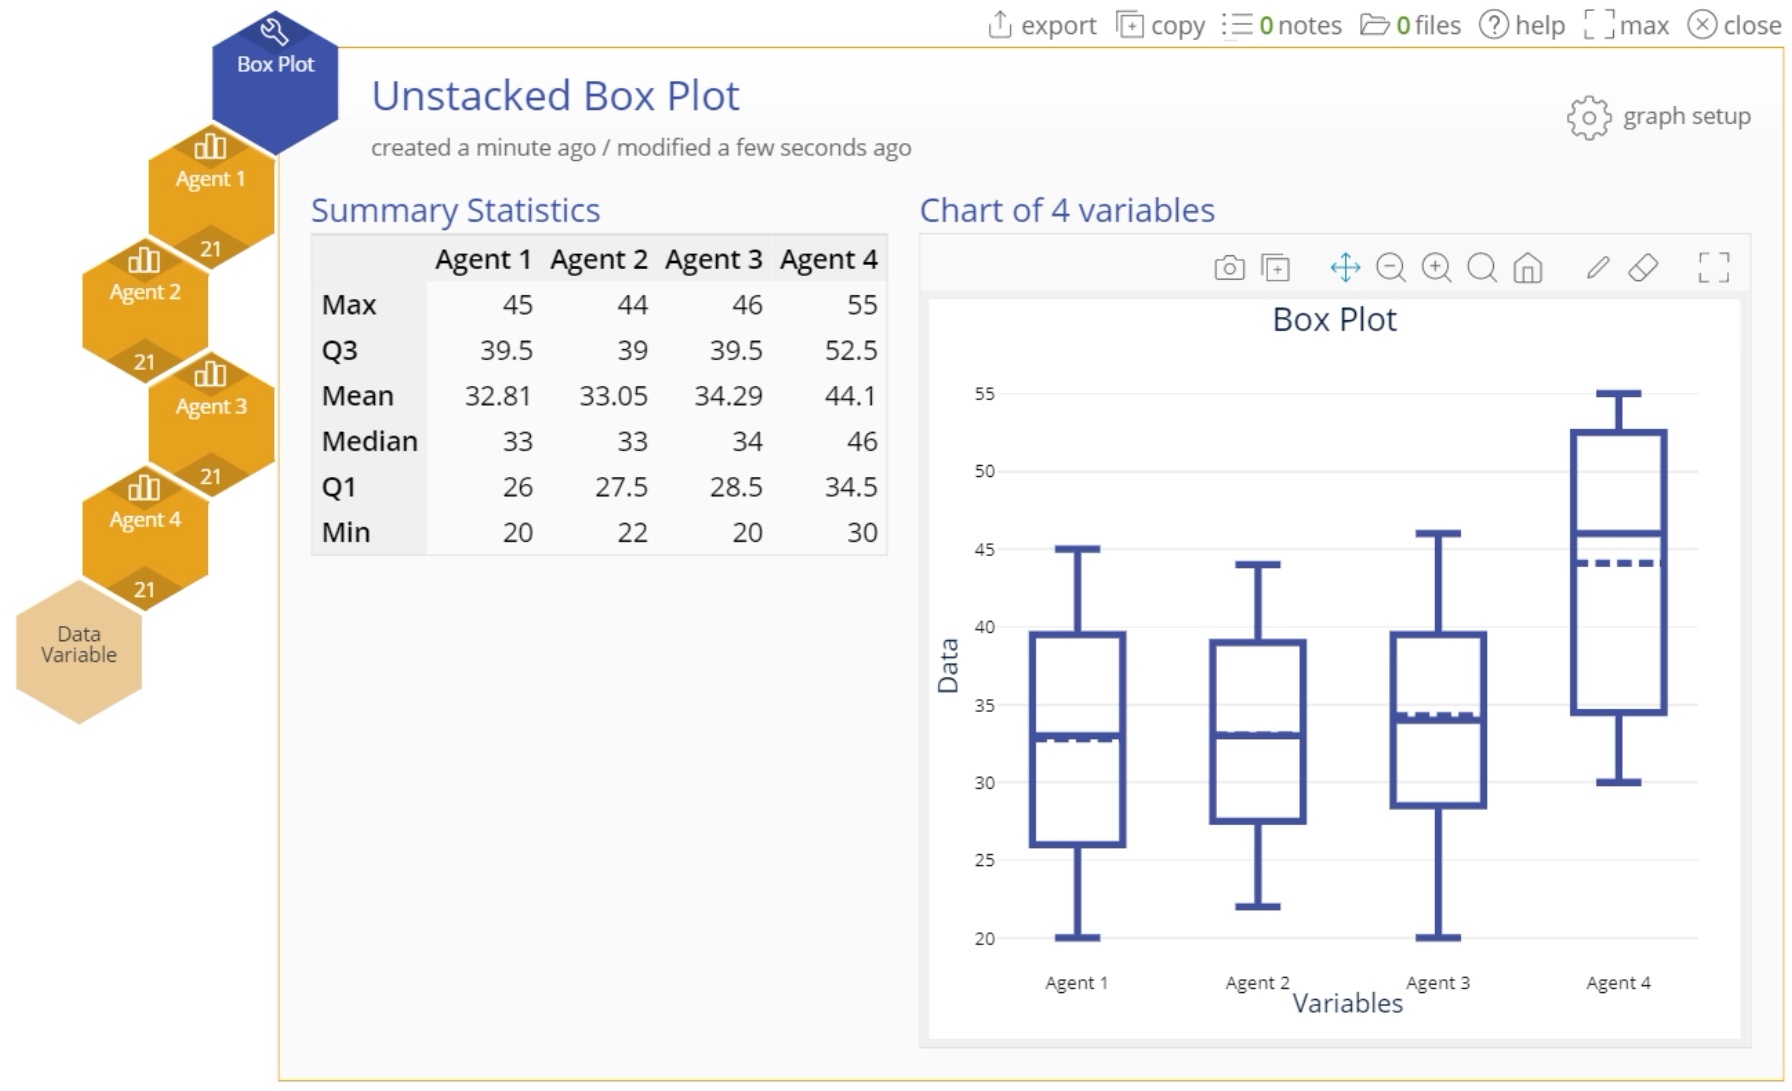 EngineRoom box plot with unstacked data.